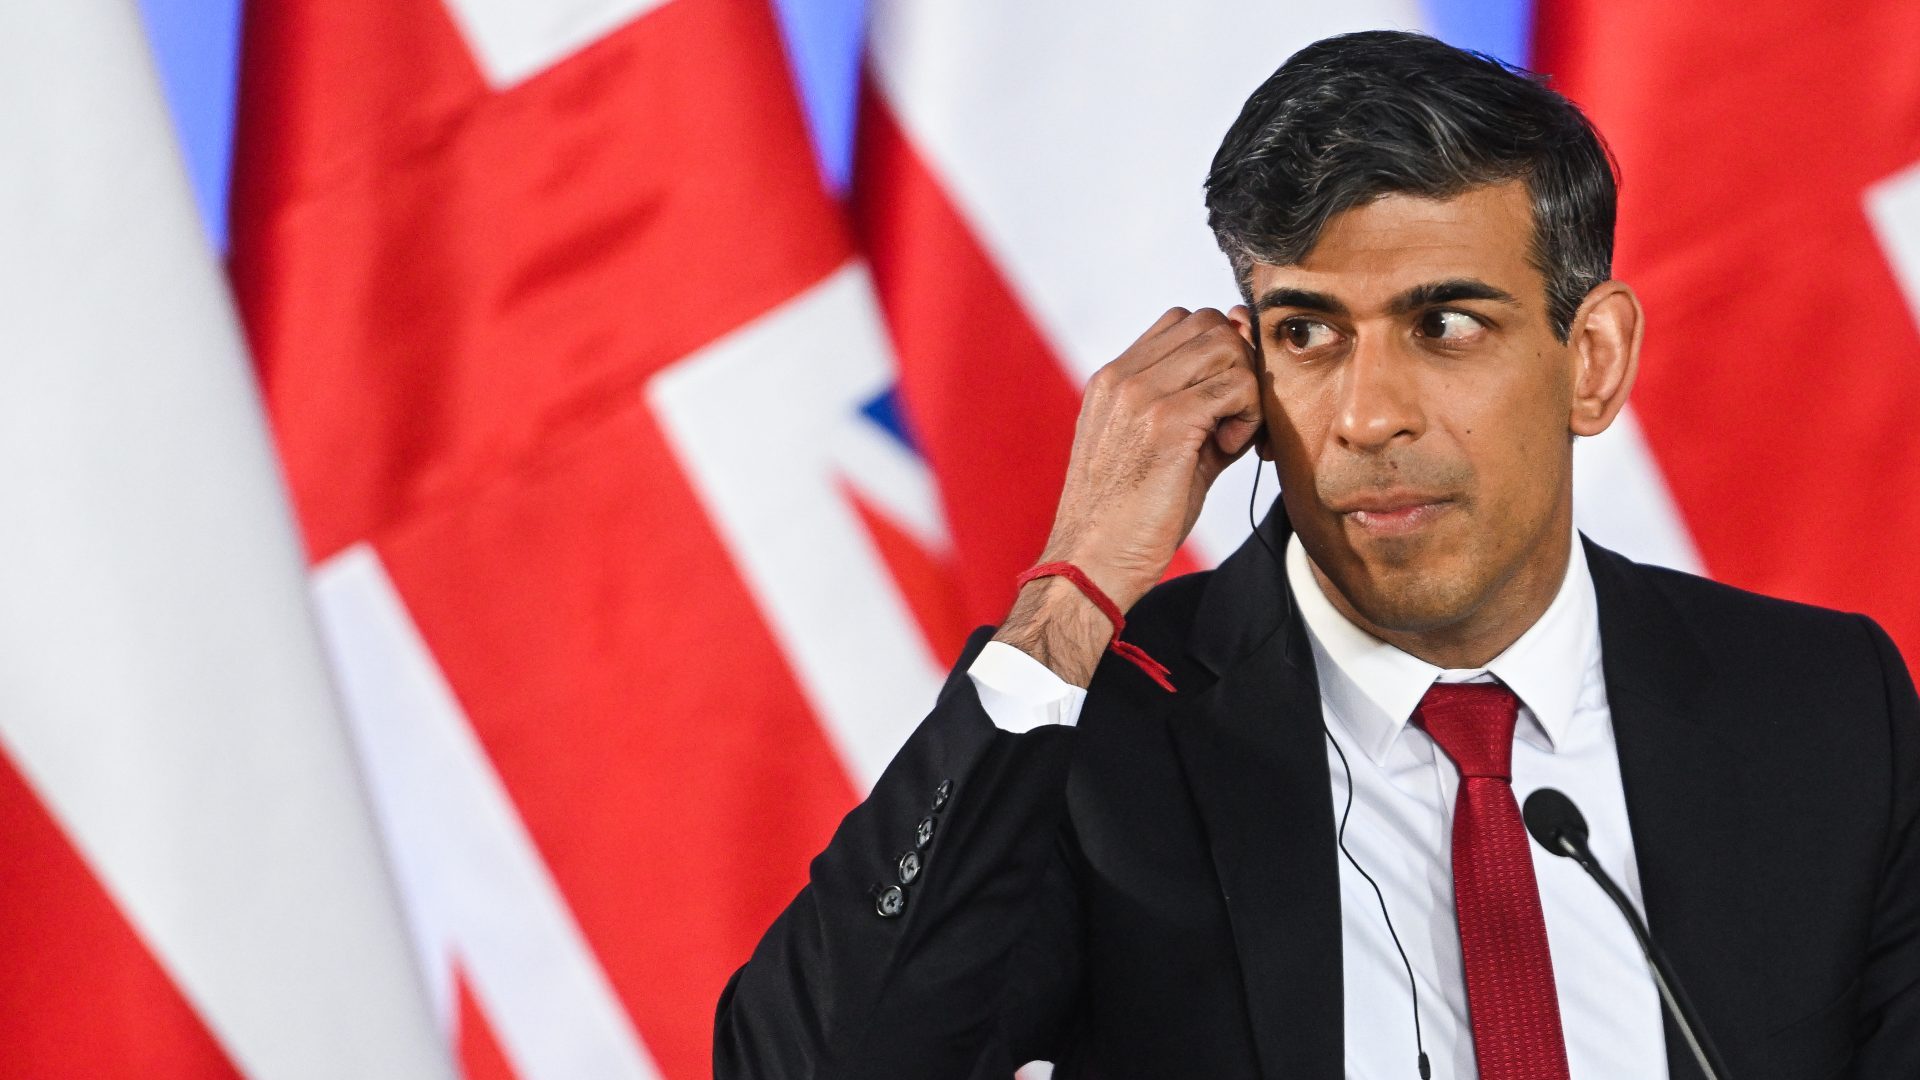 Rishi Sunak is safe until the general election, but the local election results were catastrophic for his party. Photo: Omar Marques/Getty